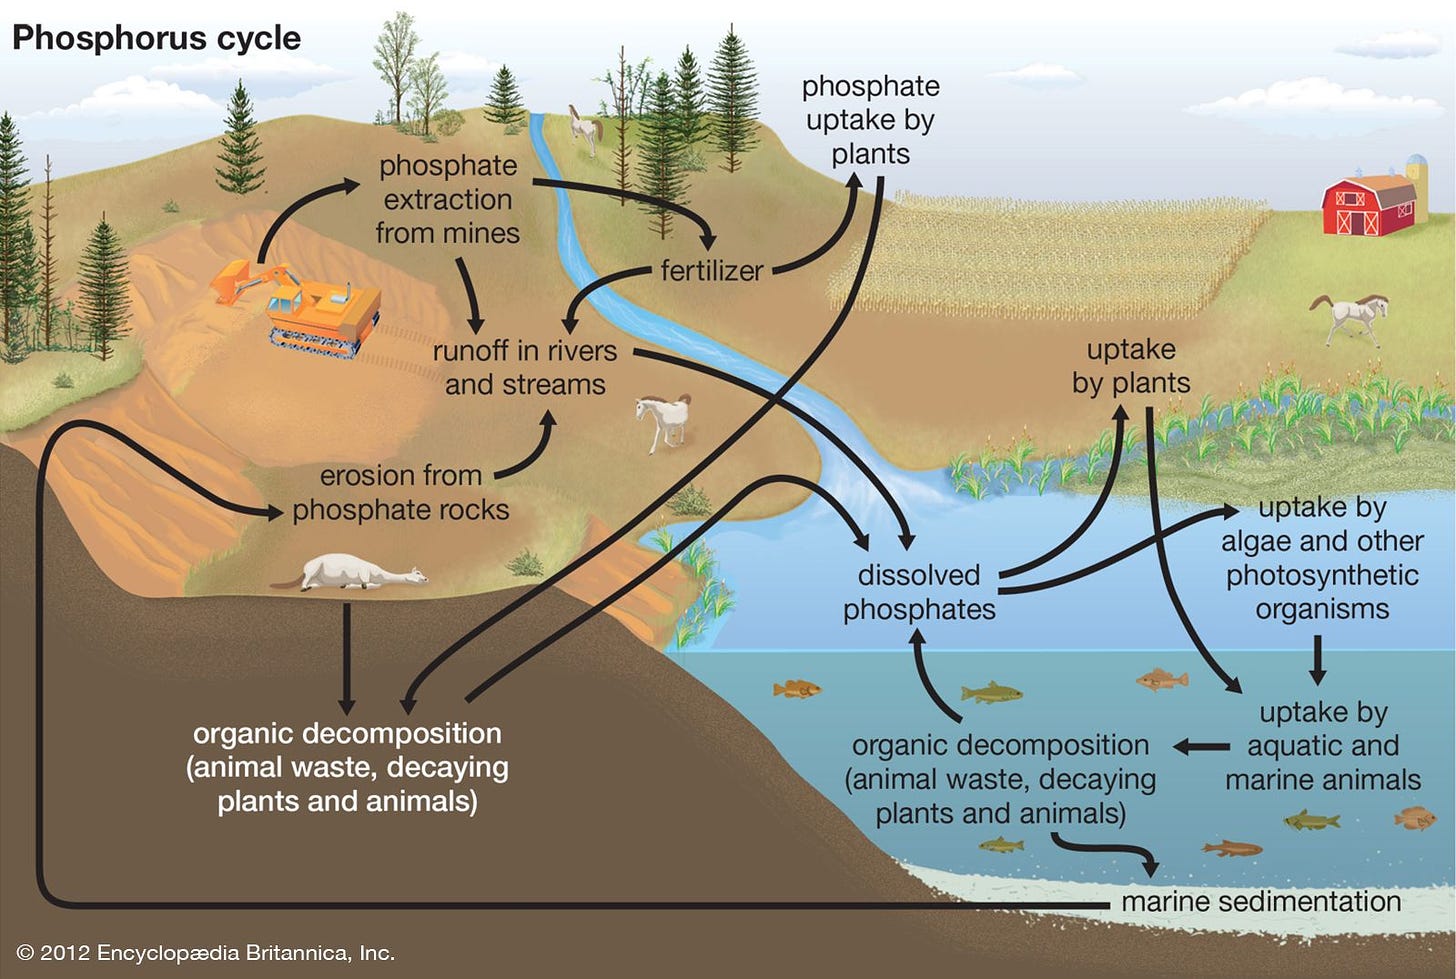 Eutrophication | Definition, Types, Causes, & Effects | Britannica